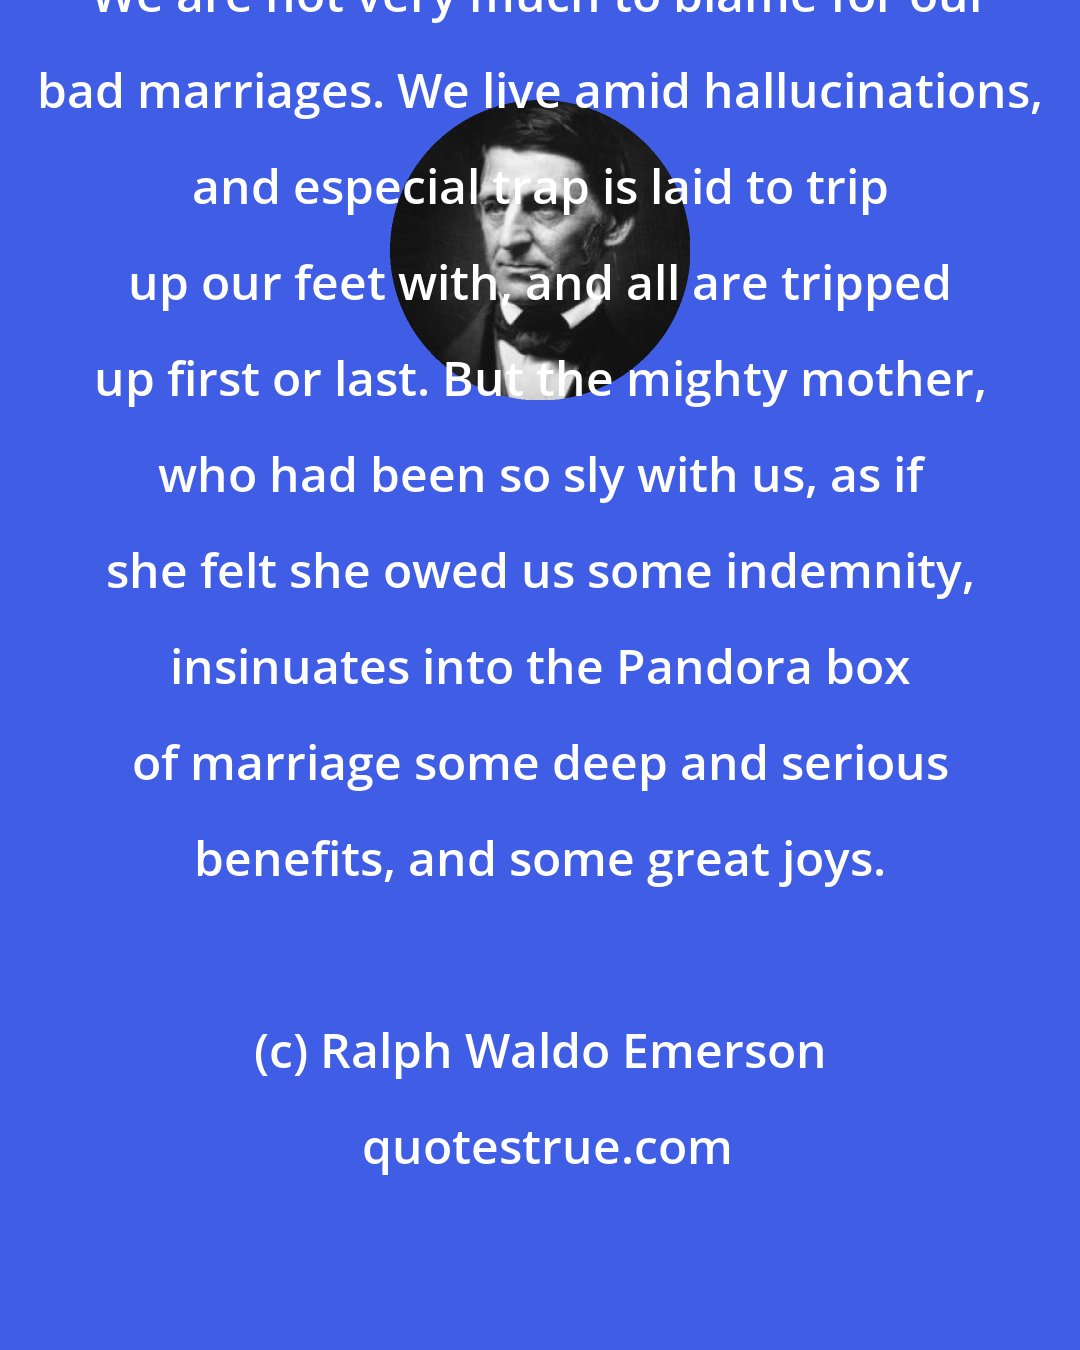 Ralph Waldo Emerson: We are not very much to blame for our bad marriages. We live amid hallucinations, and especial trap is laid to trip up our feet with, and all are tripped up first or last. But the mighty mother, who had been so sly with us, as if she felt she owed us some indemnity, insinuates into the Pandora box of marriage some deep and serious benefits, and some great joys.